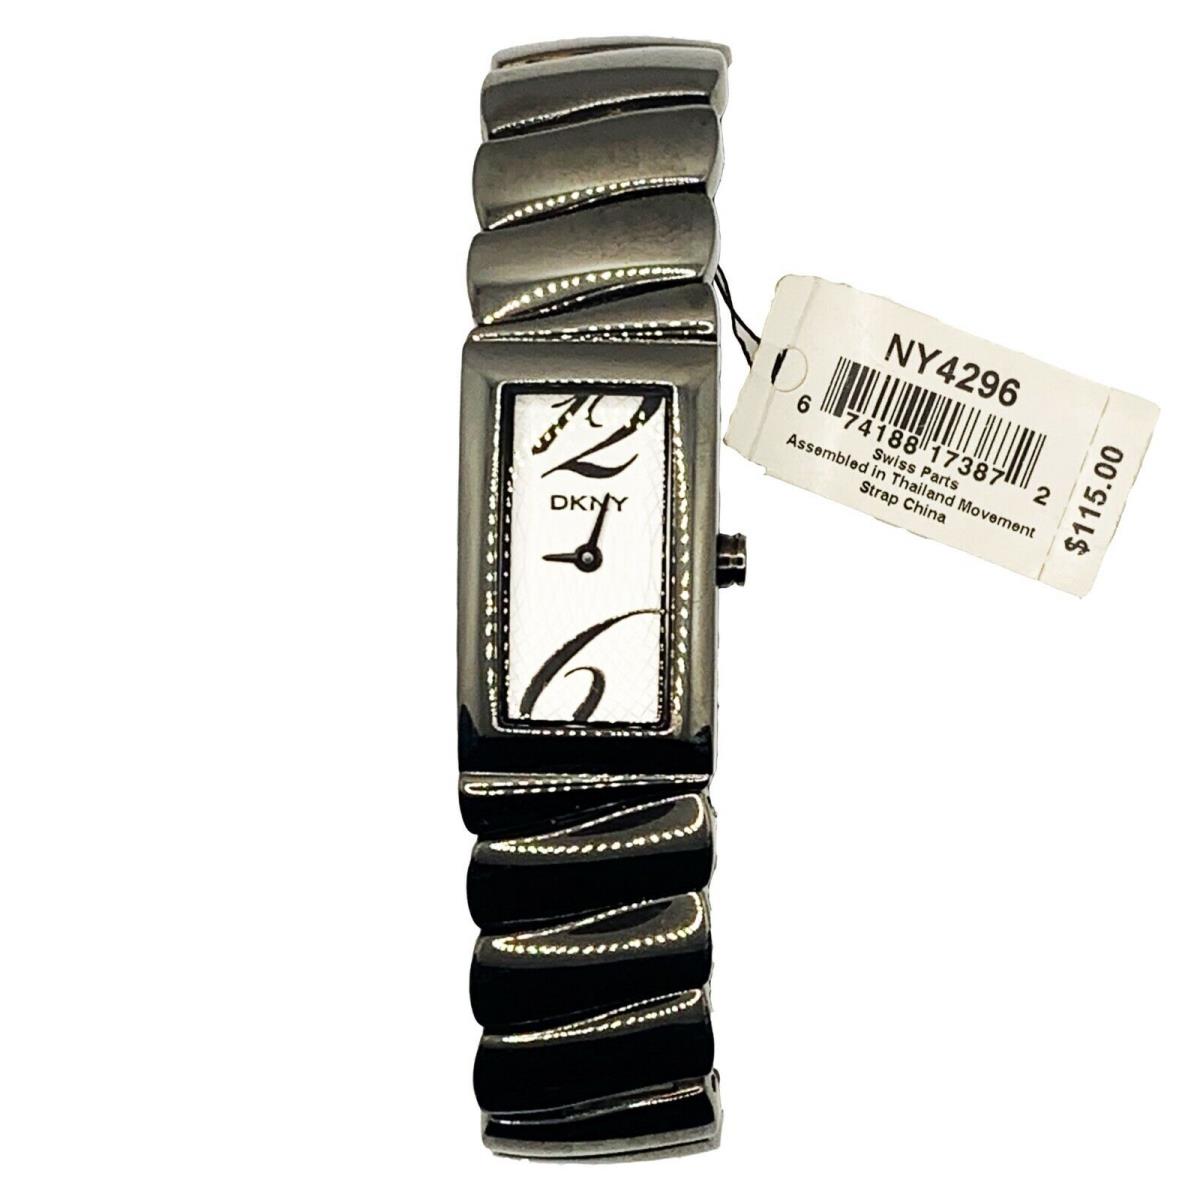 Dkny Ladies Bracelet Watch Comes with White Dial and Grey Bracelet NY4296